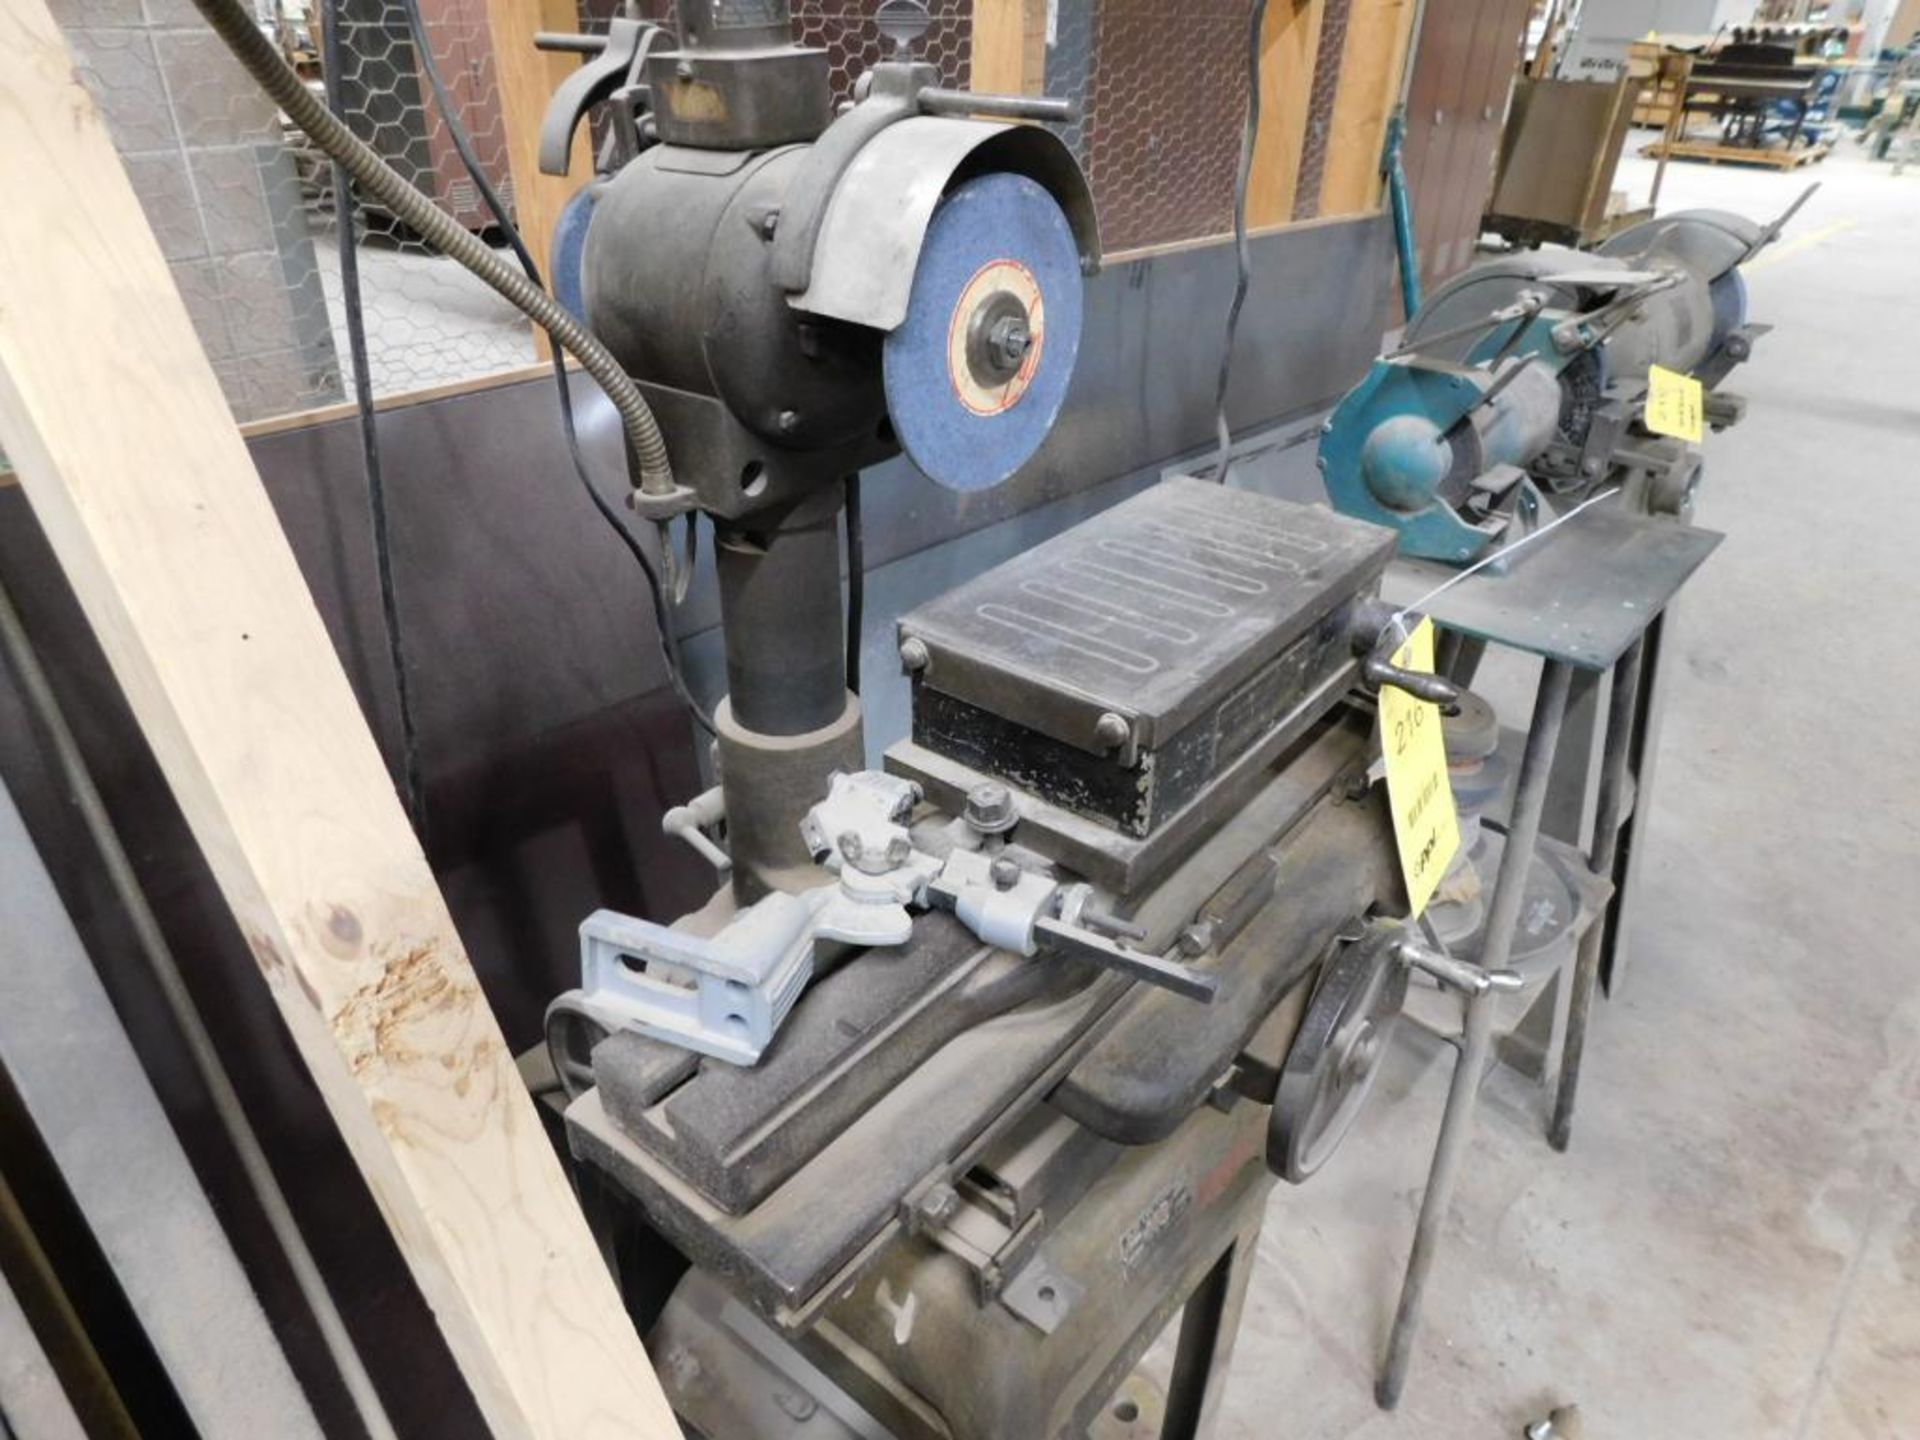 K.O. Lee Universal Grinder, Model A-60-D, S/N 1441, 3" x 20" Single Slot Table, Drill Grinder Attach - Image 3 of 4